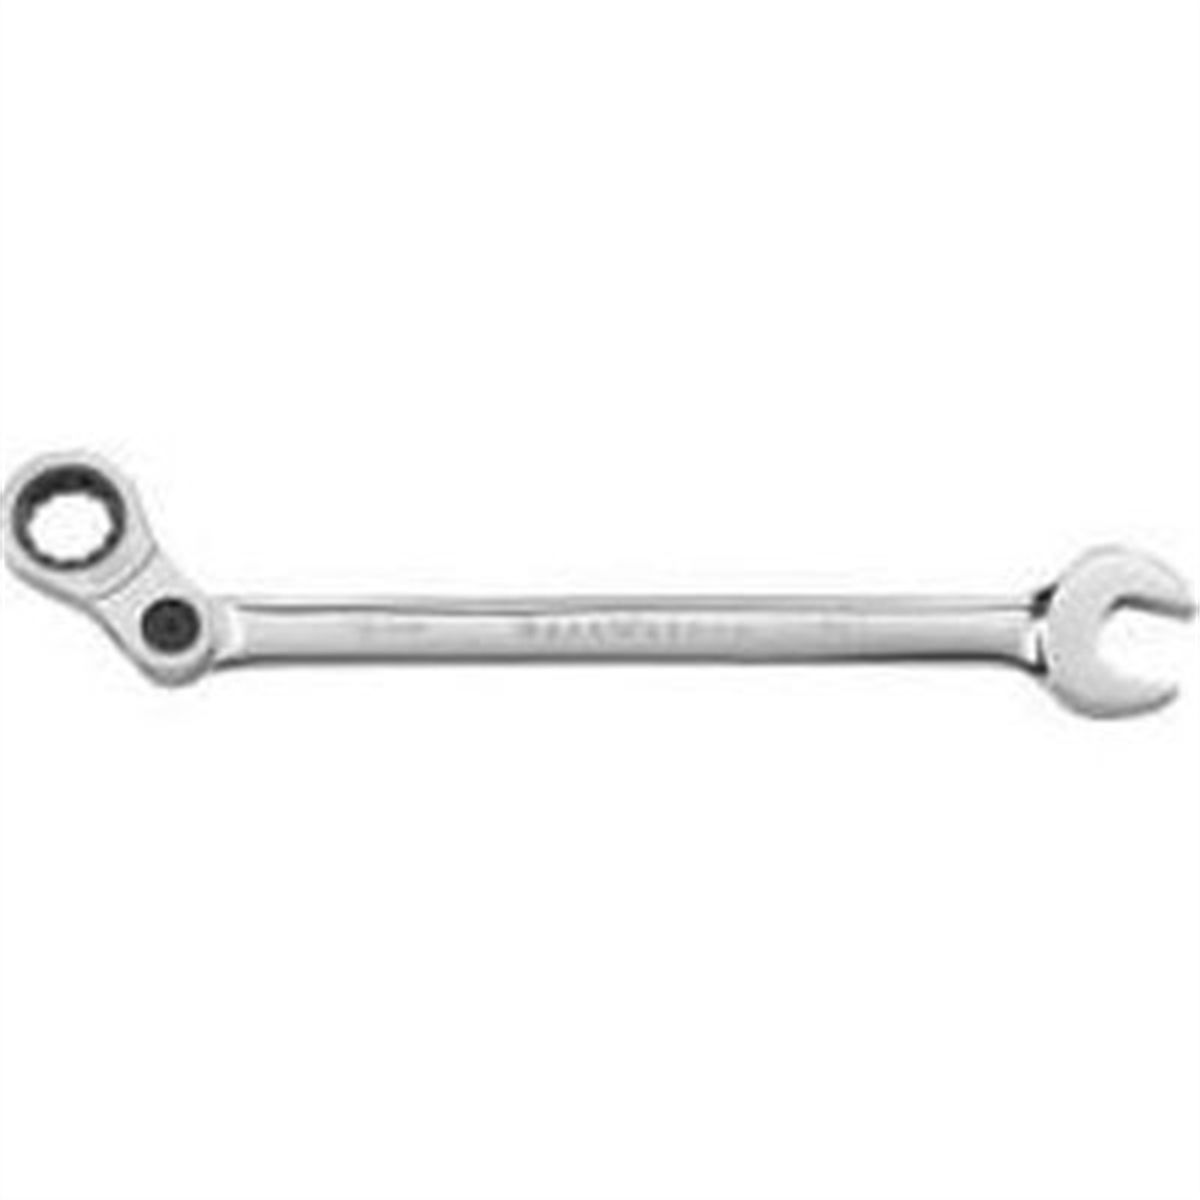 16MM INDEXING COMBINATION WRENCH